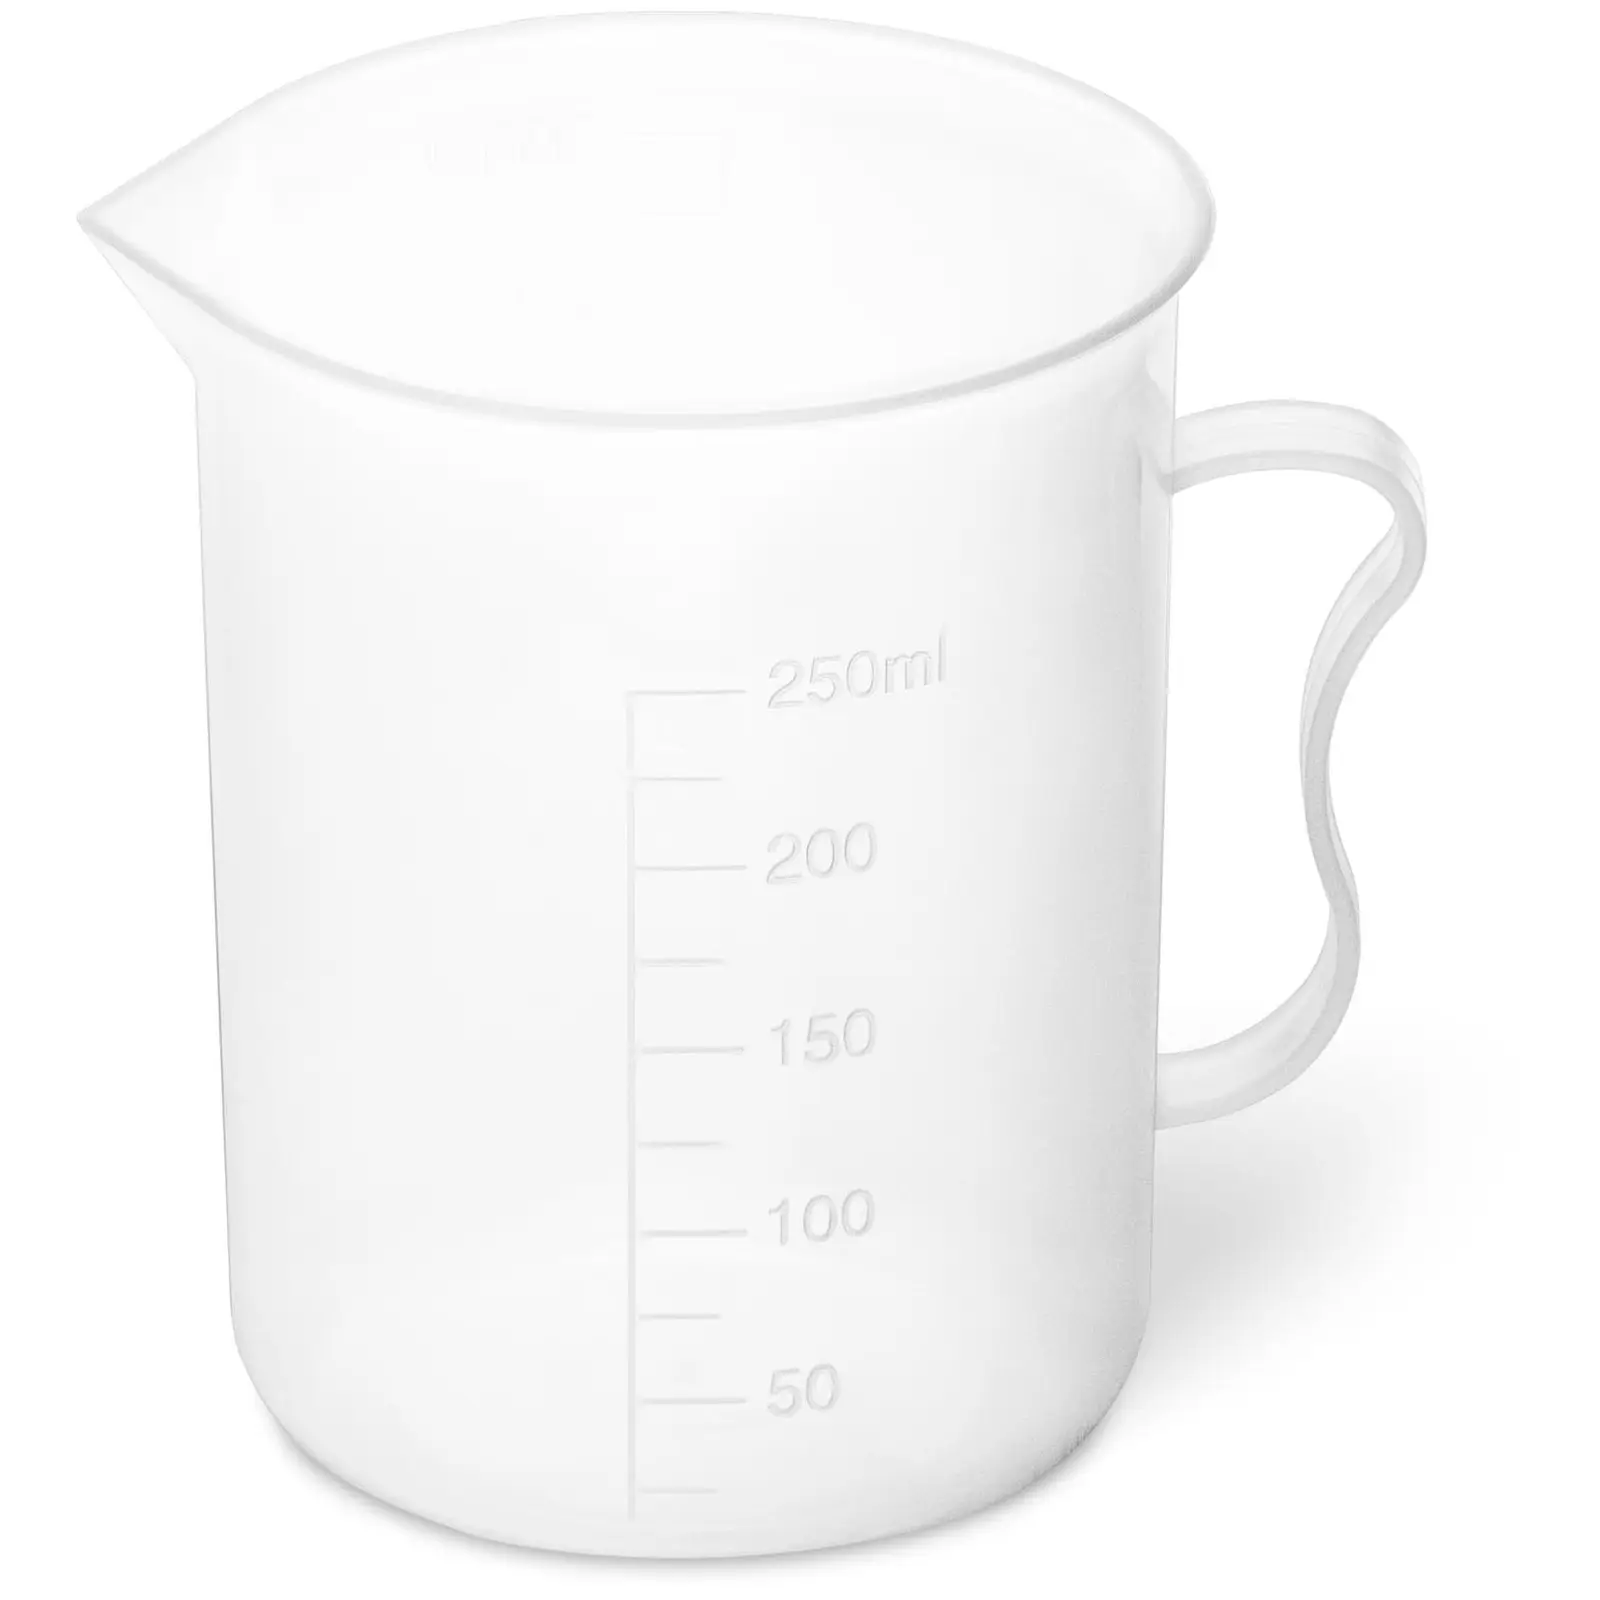 Laboratory Beaker - 10 pcs. - 300 ml - with spout and handle